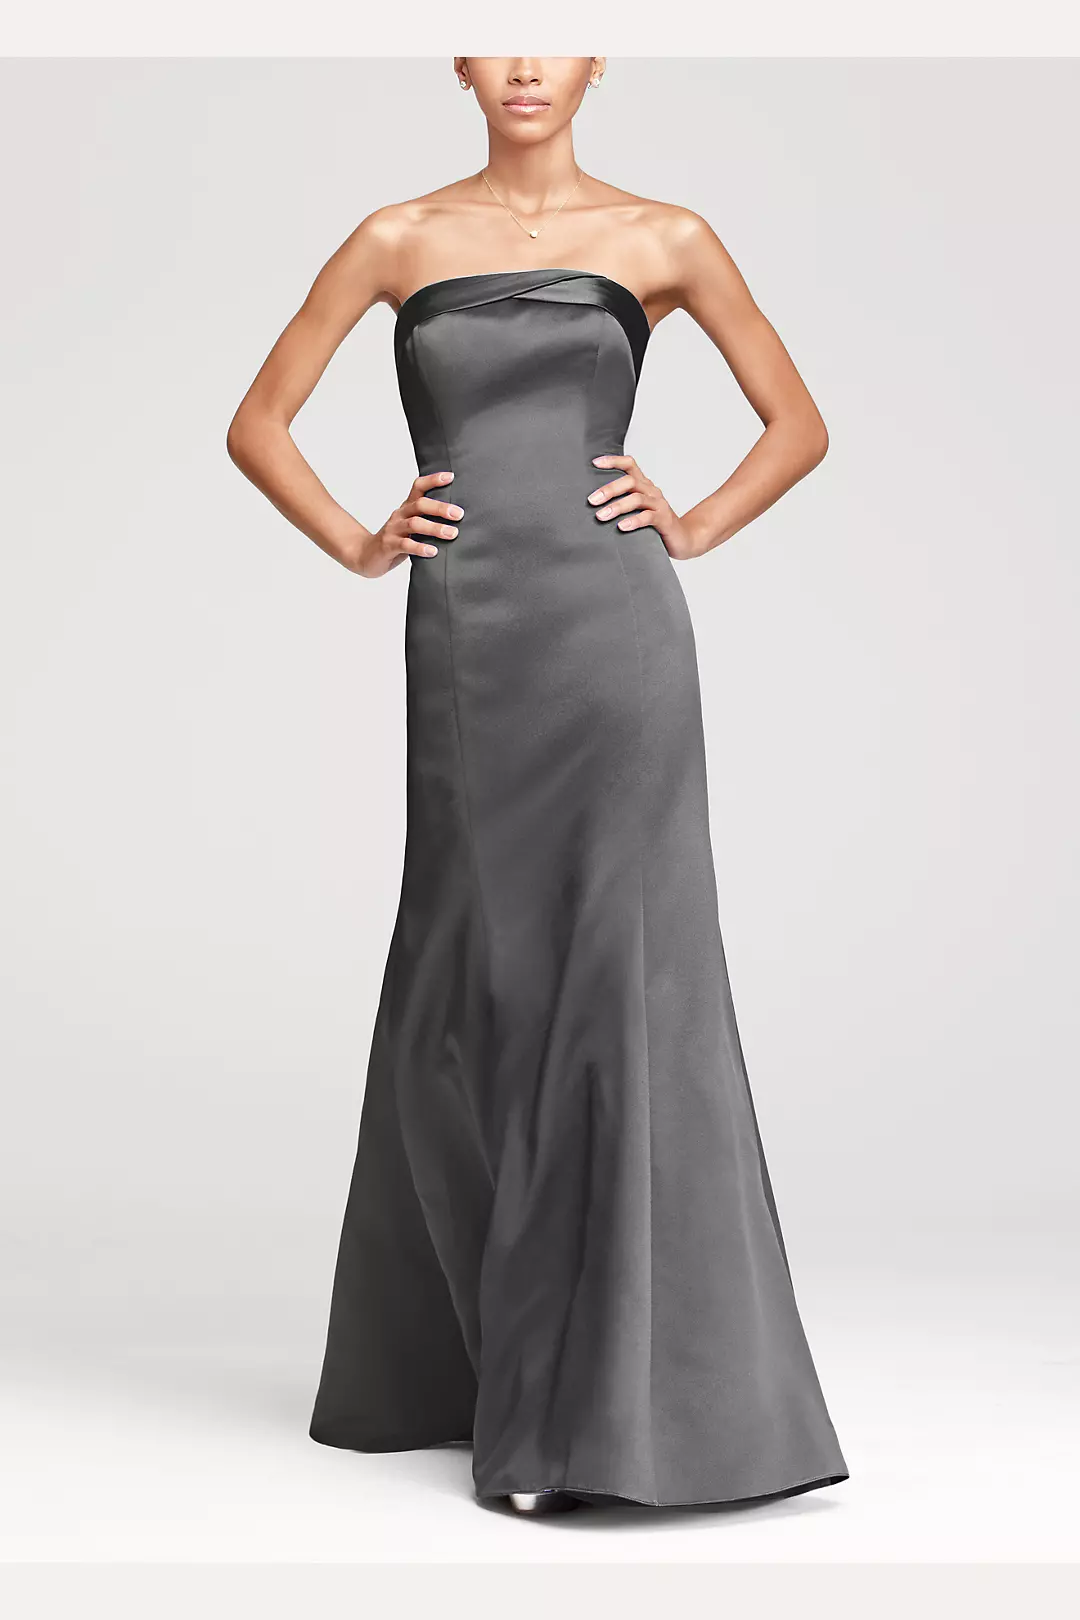 Strapless Dress with Cuff Neckline and Corset Back Image